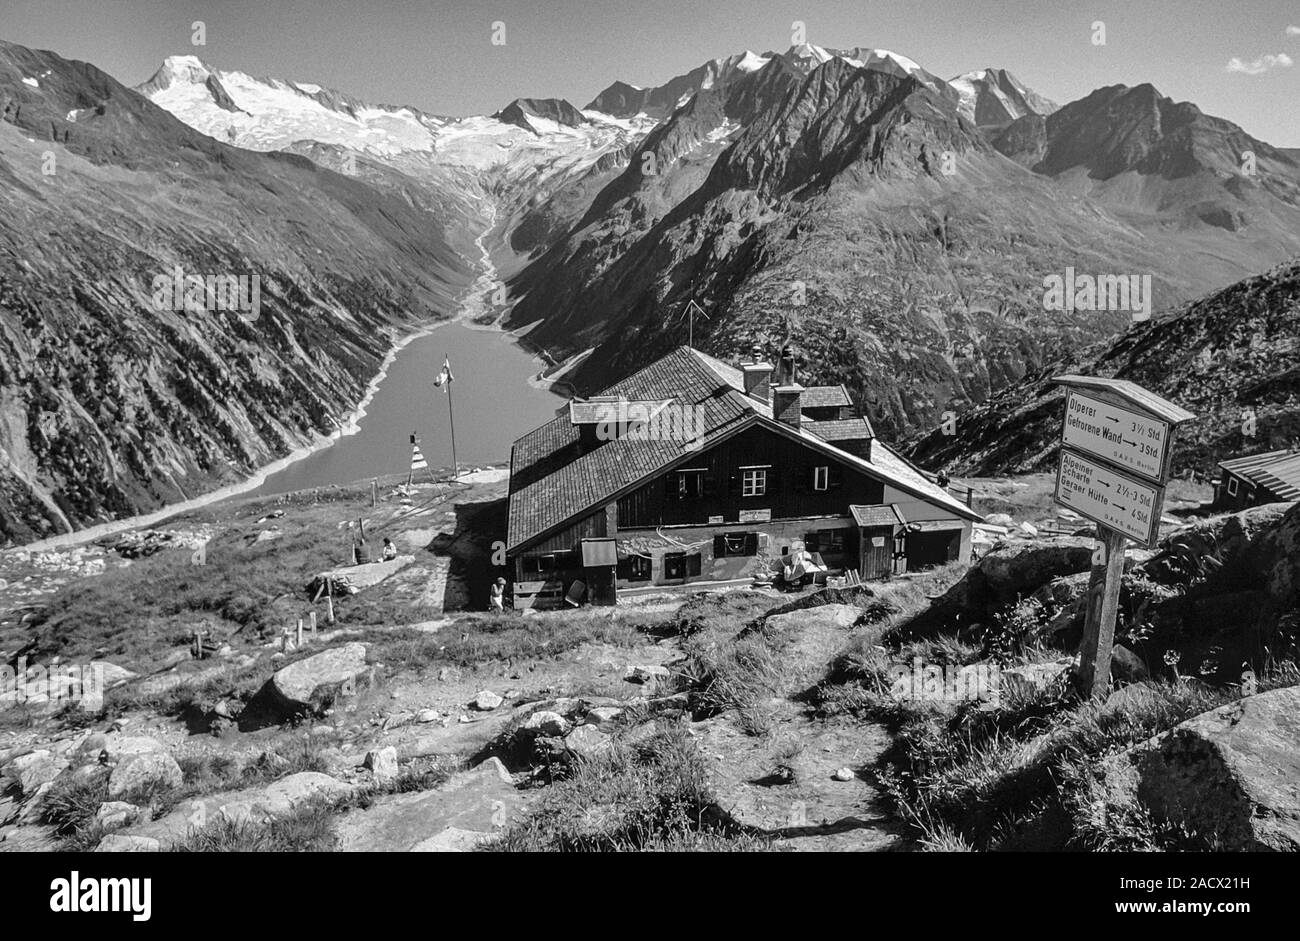 The German Alpine Club, Olperer Hut mountain refuge in the Zilletal Alps of the Austrian Tirol on the Berliner Hoehen Weg long distance walking trail as it was in 1992. The hut suffered severe avalanche damage in 1998. The hut has since been replaced with a new hut. The hut overlooks the Schlegies reservoir and the main peaks of the Zillertal Alps Stock Photo